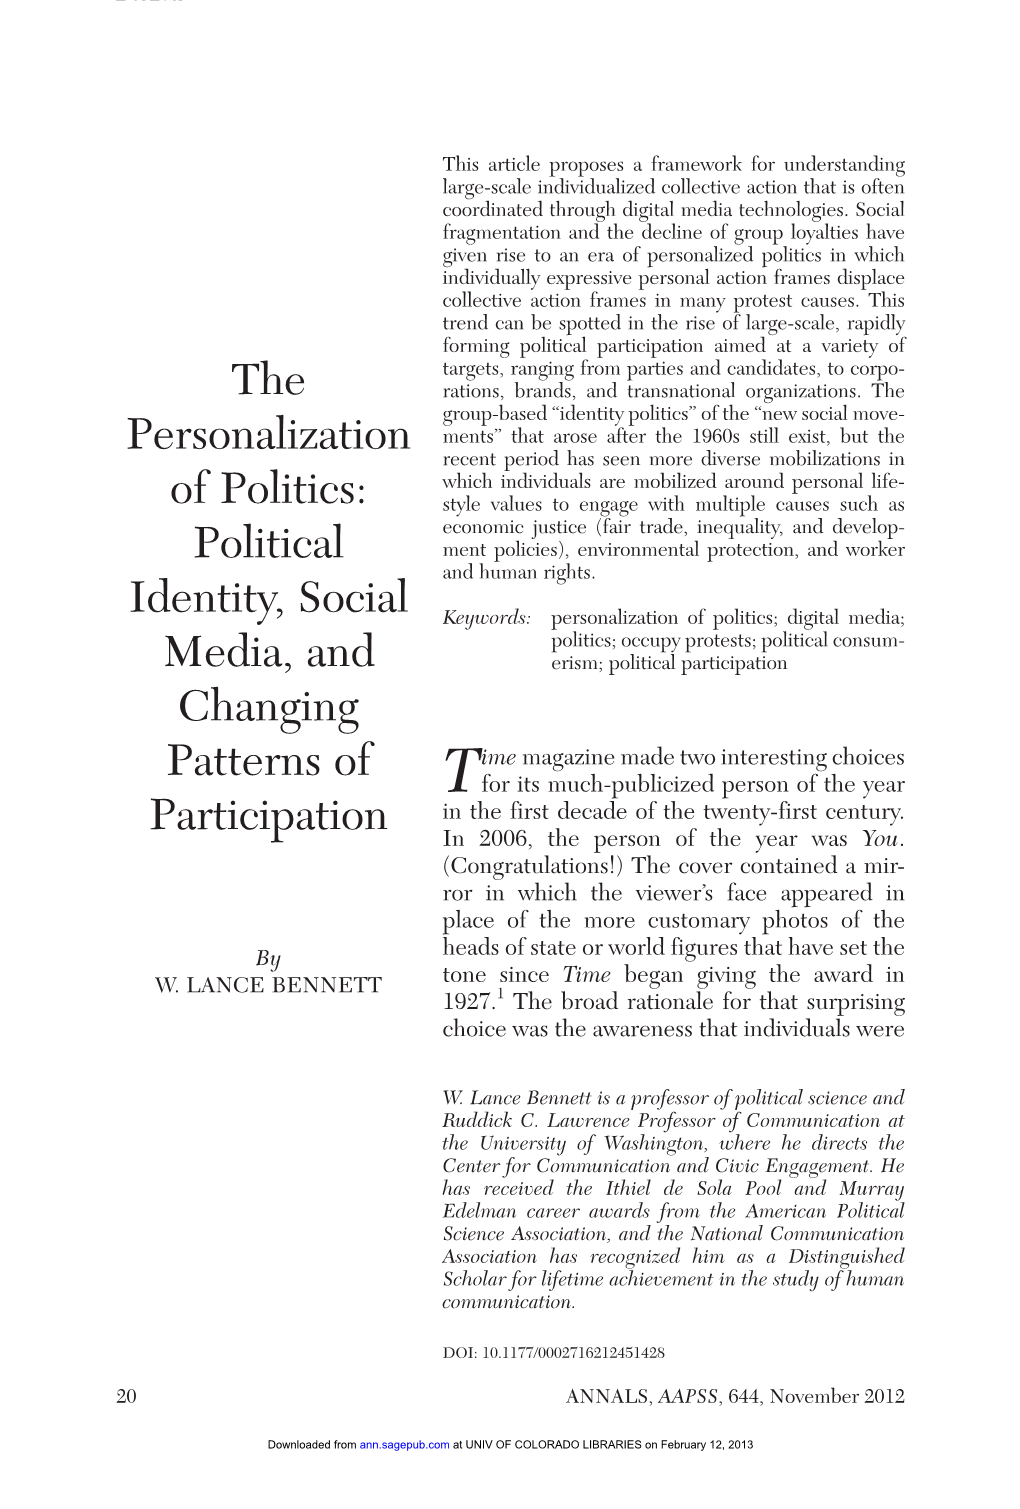 The Personalization of Politics: Political Identity, Social Media, And